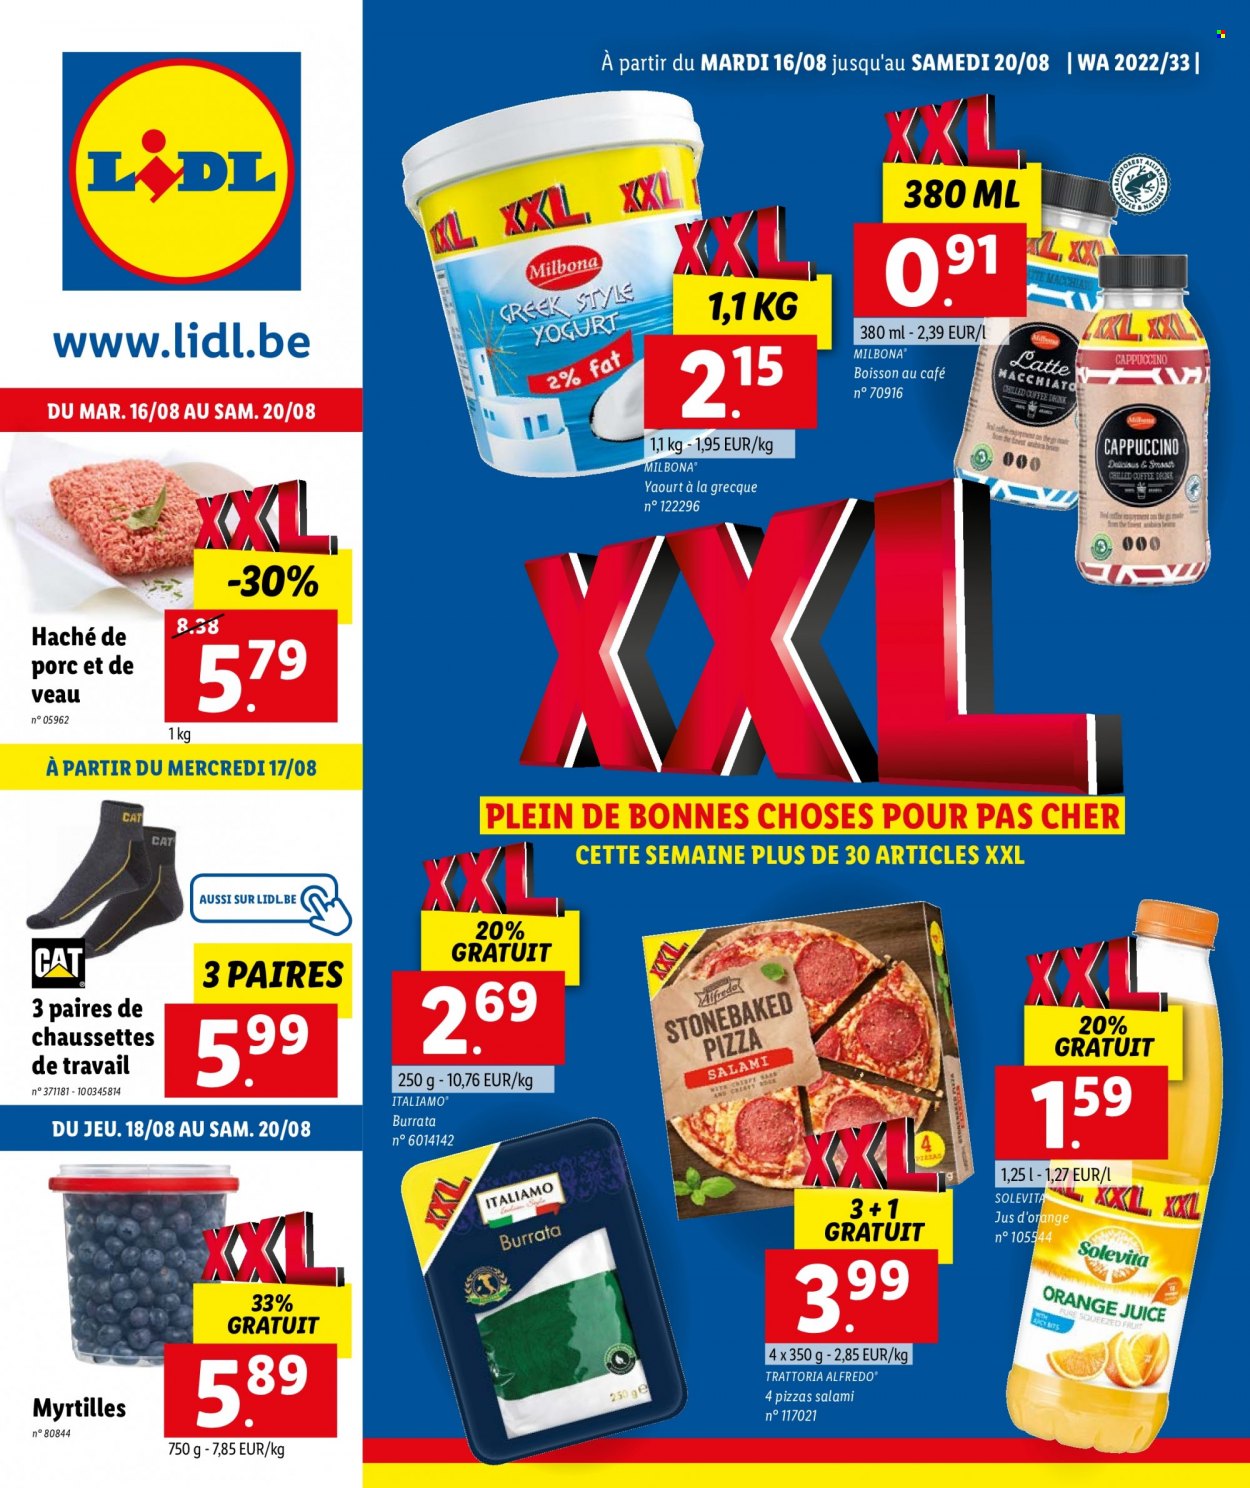 Catalogue Lidl - 16.8.2022 - 20.8.2022. Page 1.